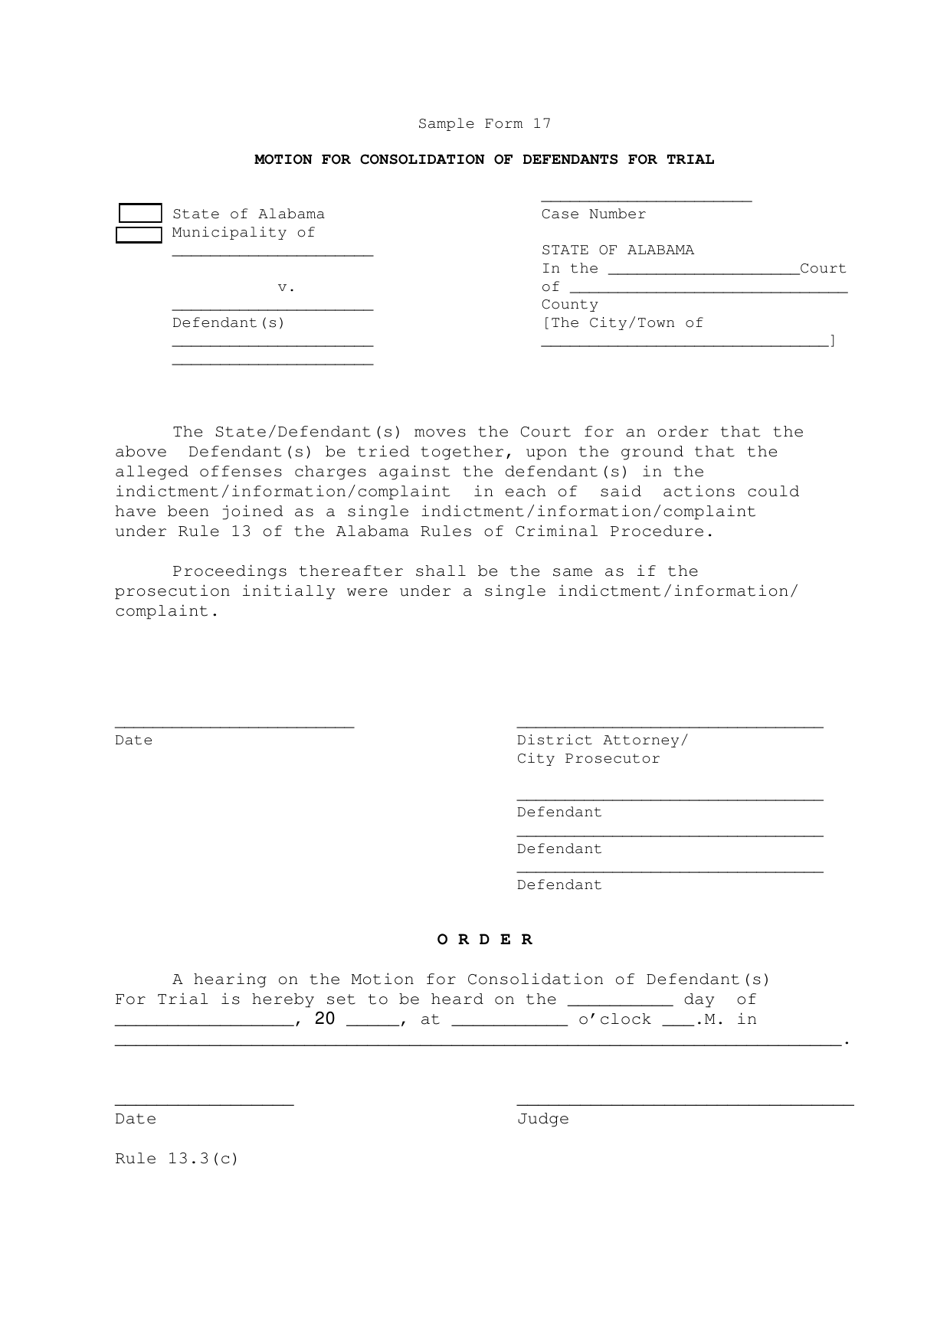 Sample Form 17 Motion for Consolidation of Defendants for Trial - Alabama, Page 1